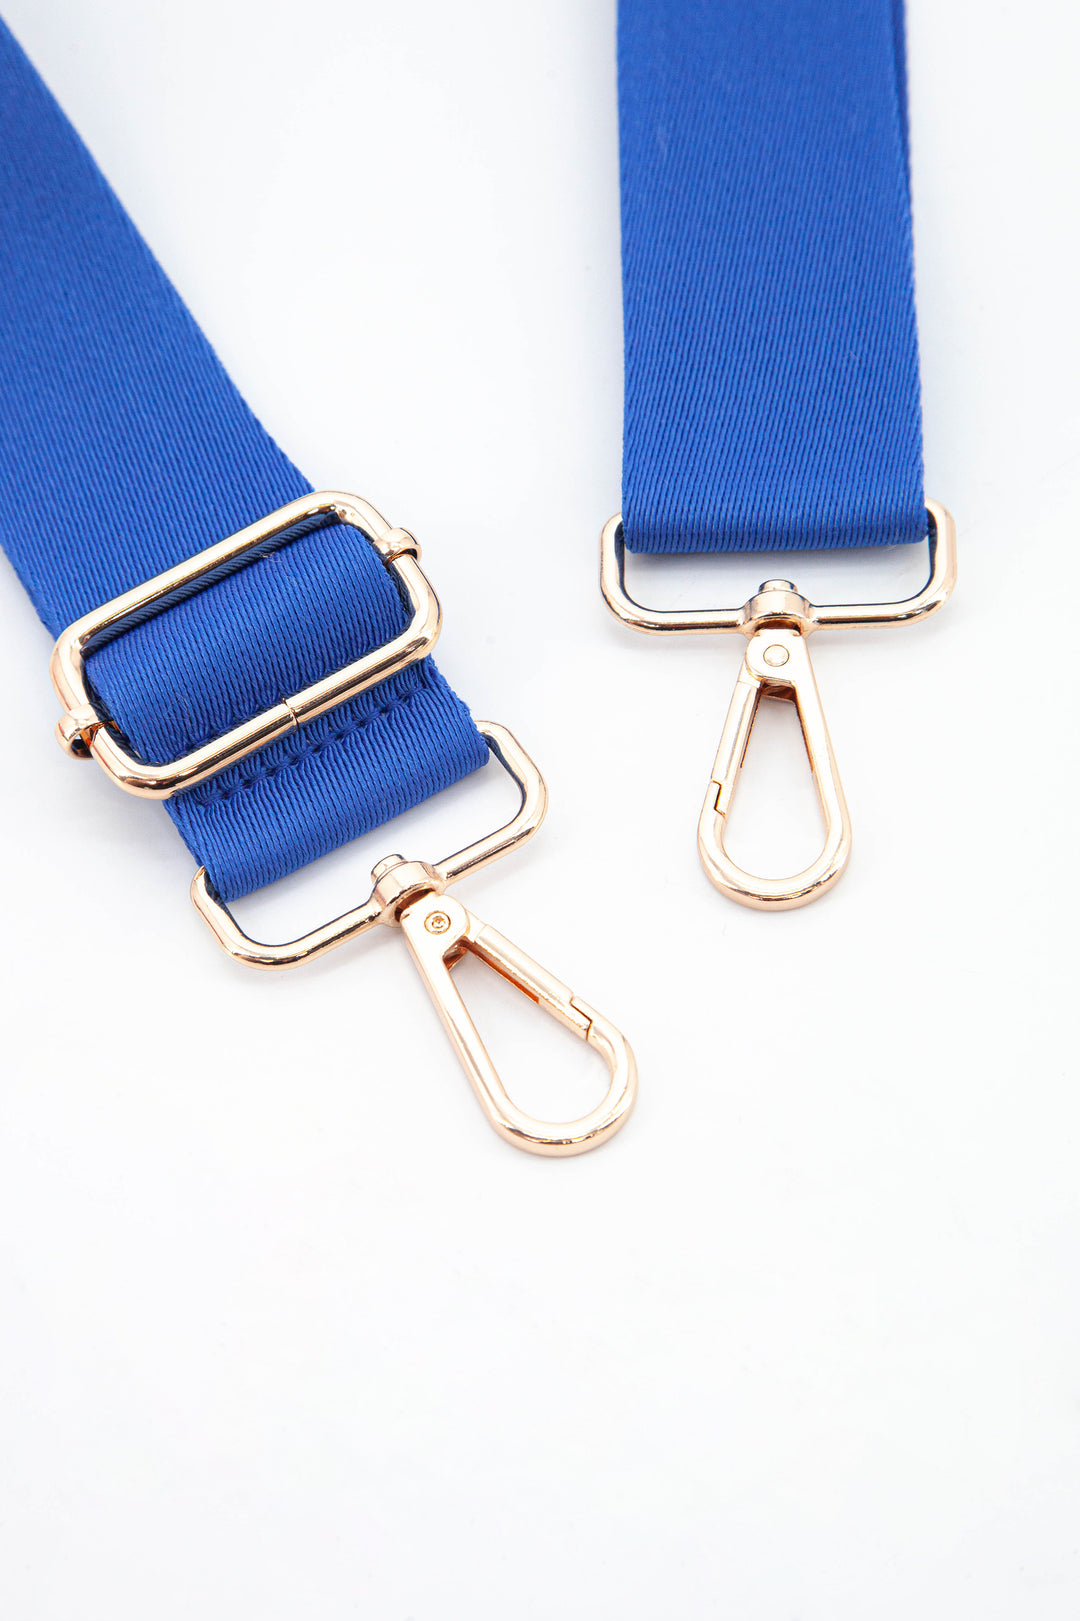 close up of the gold snap hook attachments and the vibrant blue colour of the strap